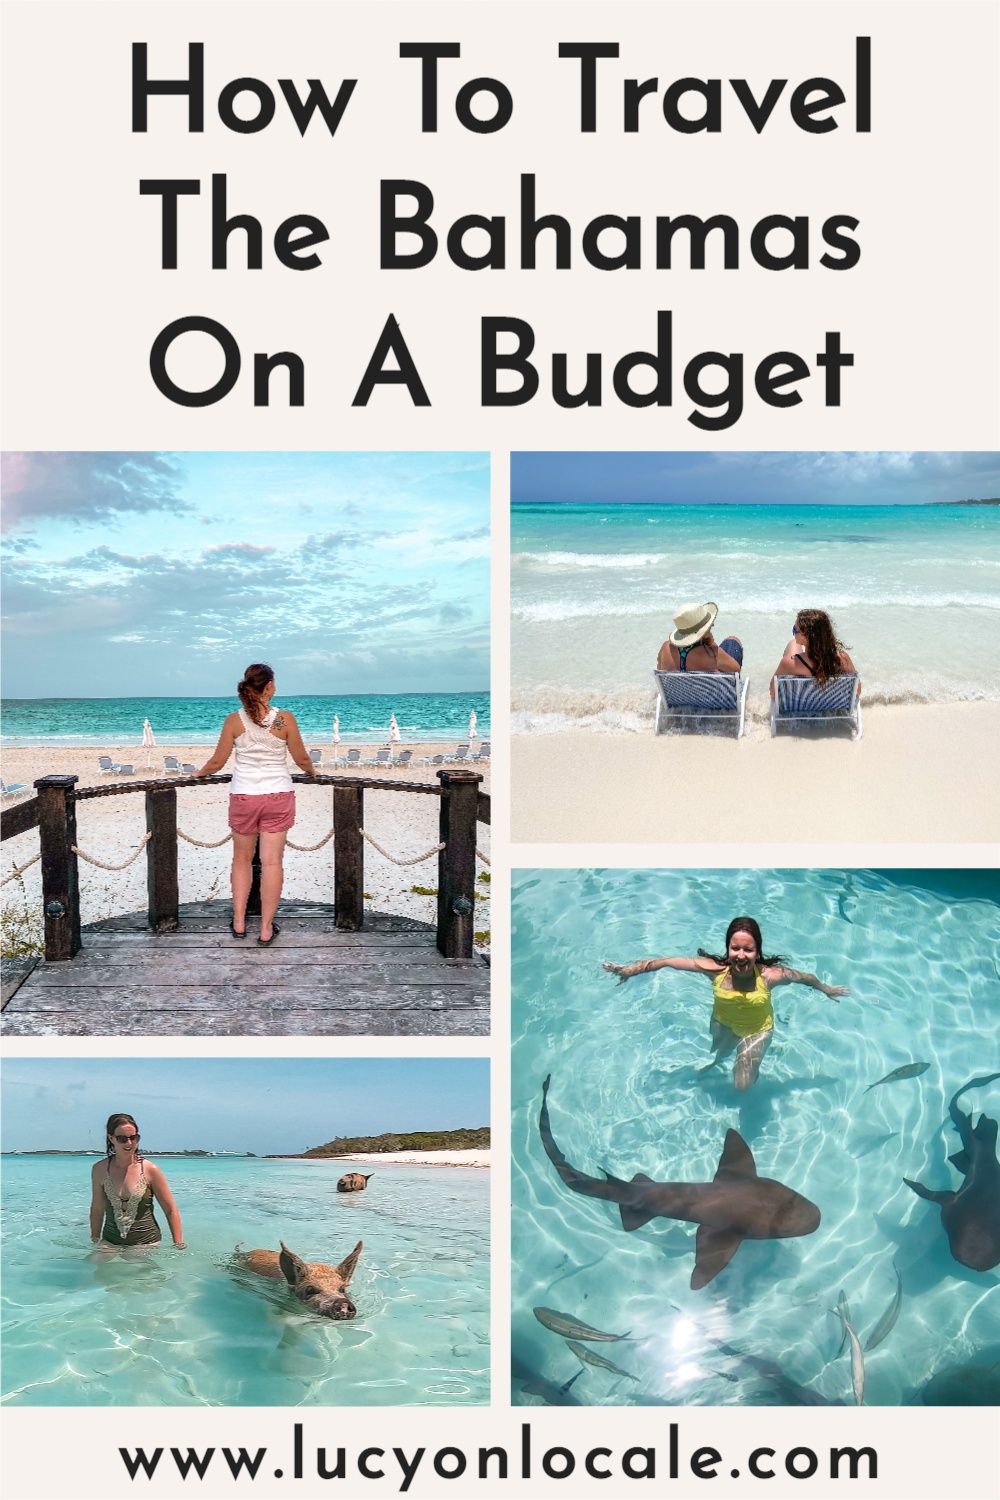 How to travel The Bahamas on a Budget